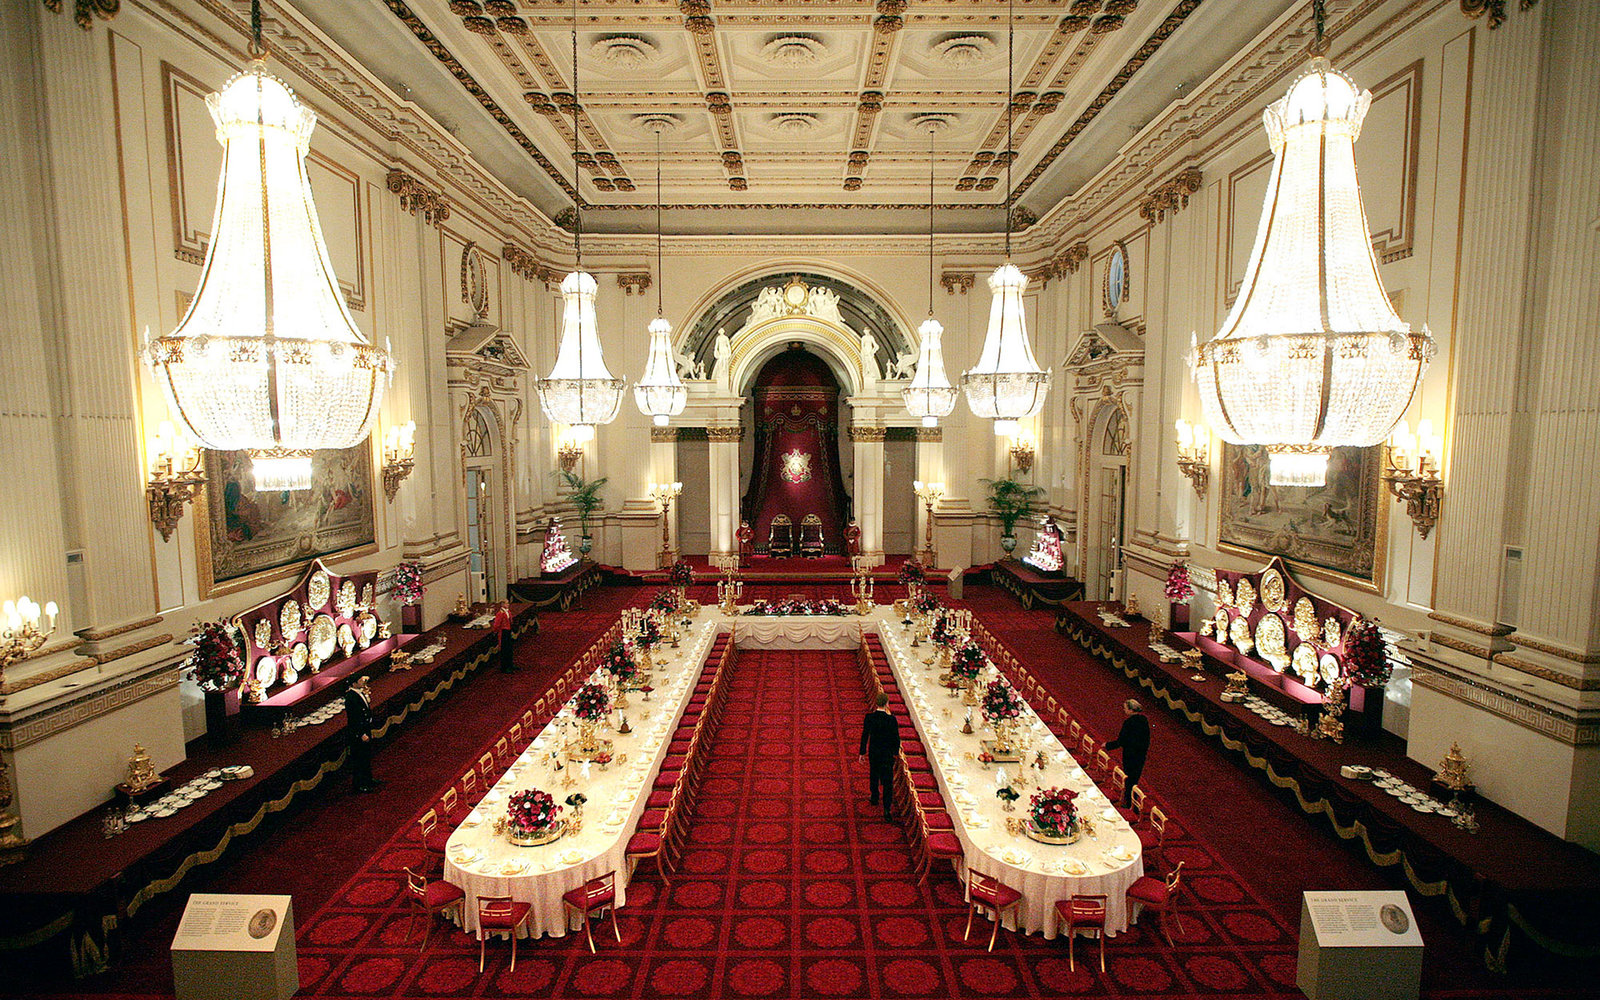 The Ballroom of Buckingham Palace set up for a State Banquet is pictured in London, on July 25, 2008. For the first time ever, visitors to Buckingham Palace will experience the spectacle of the Ballroom set up for a State Banquet. Held in honour of a visi